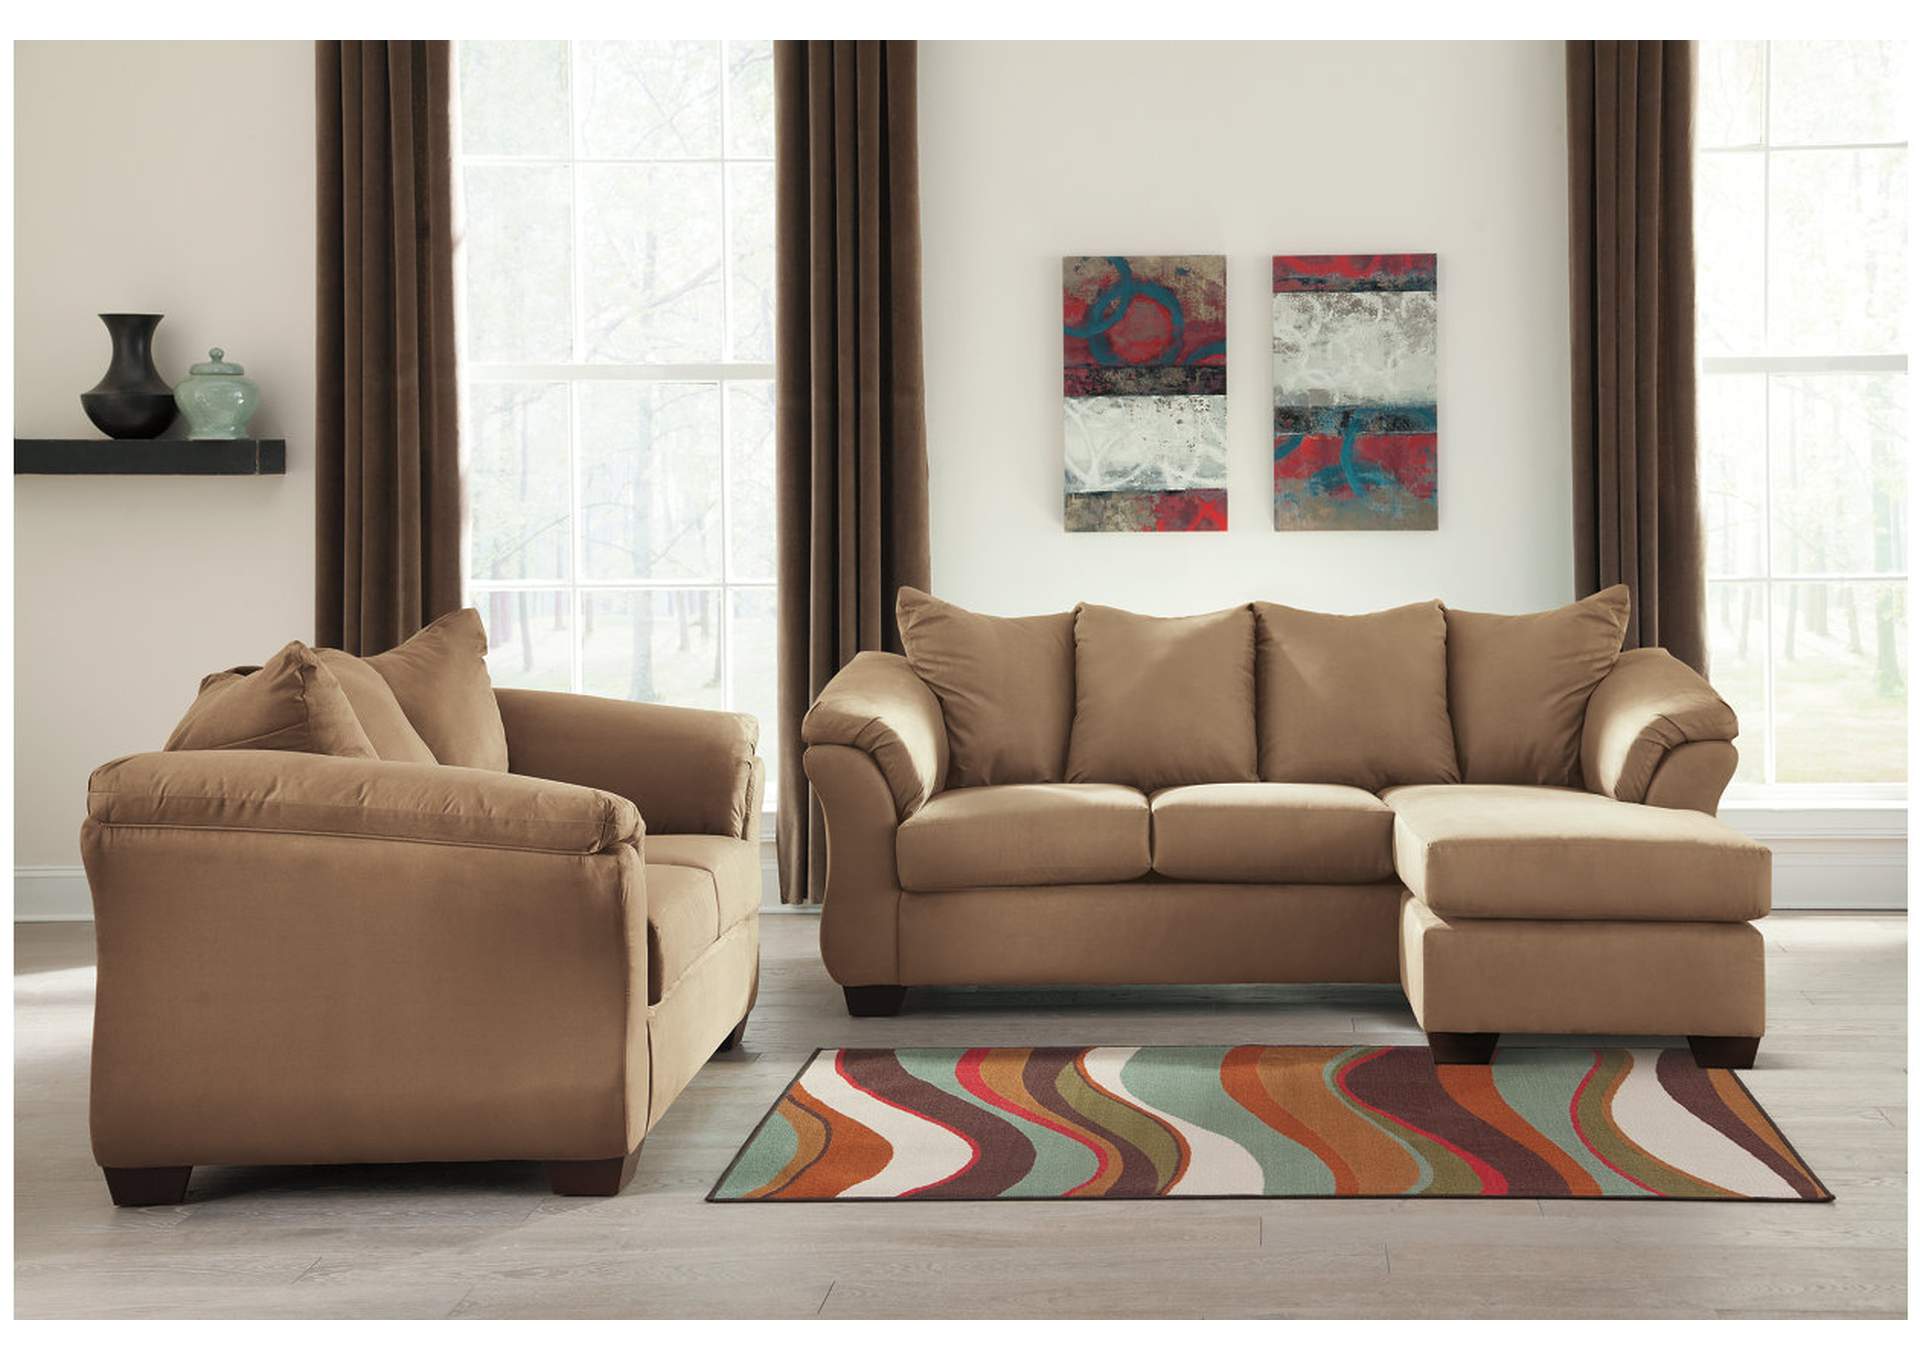 Darcy Sofa Chaise and Loveseat,Signature Design By Ashley